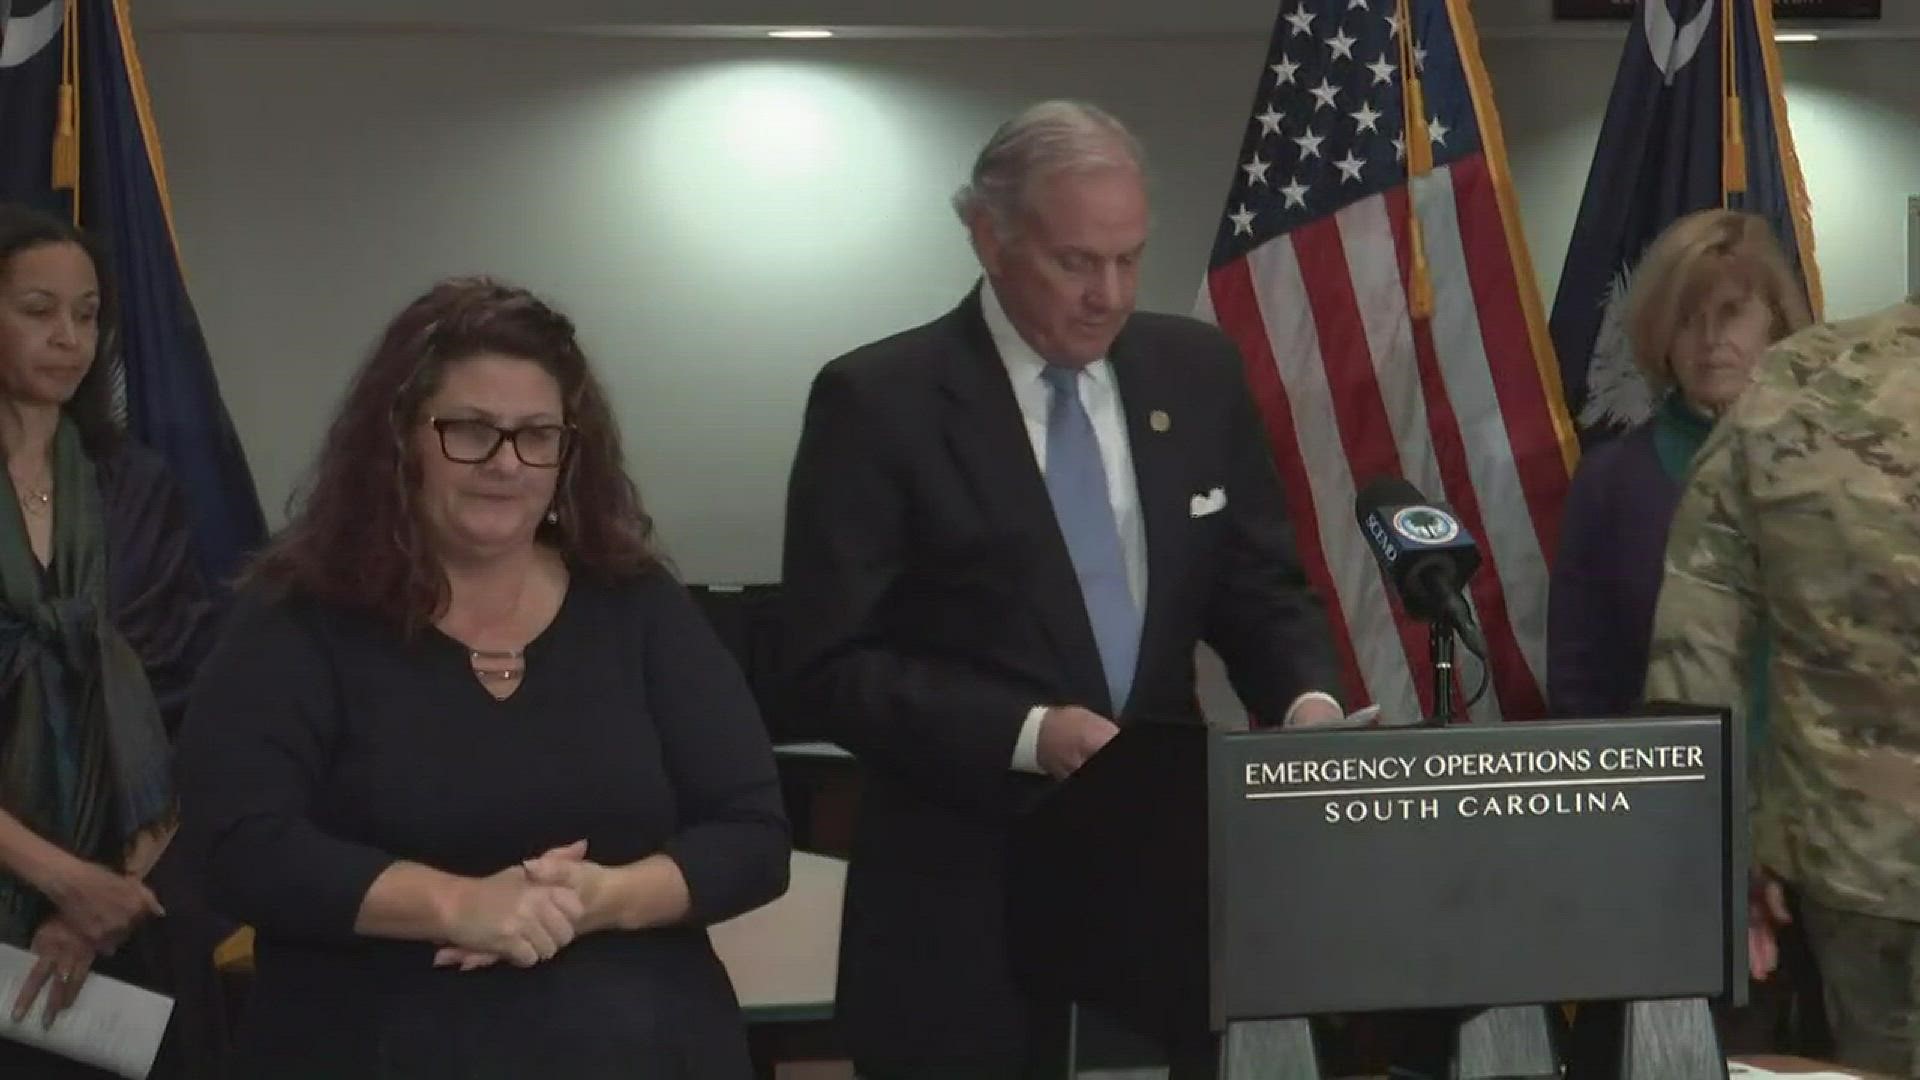 South Carolina Gov. Henry McMaster asked the public to use common sense to help combat the coronavirus in the state, as the number of cases continues to rise.